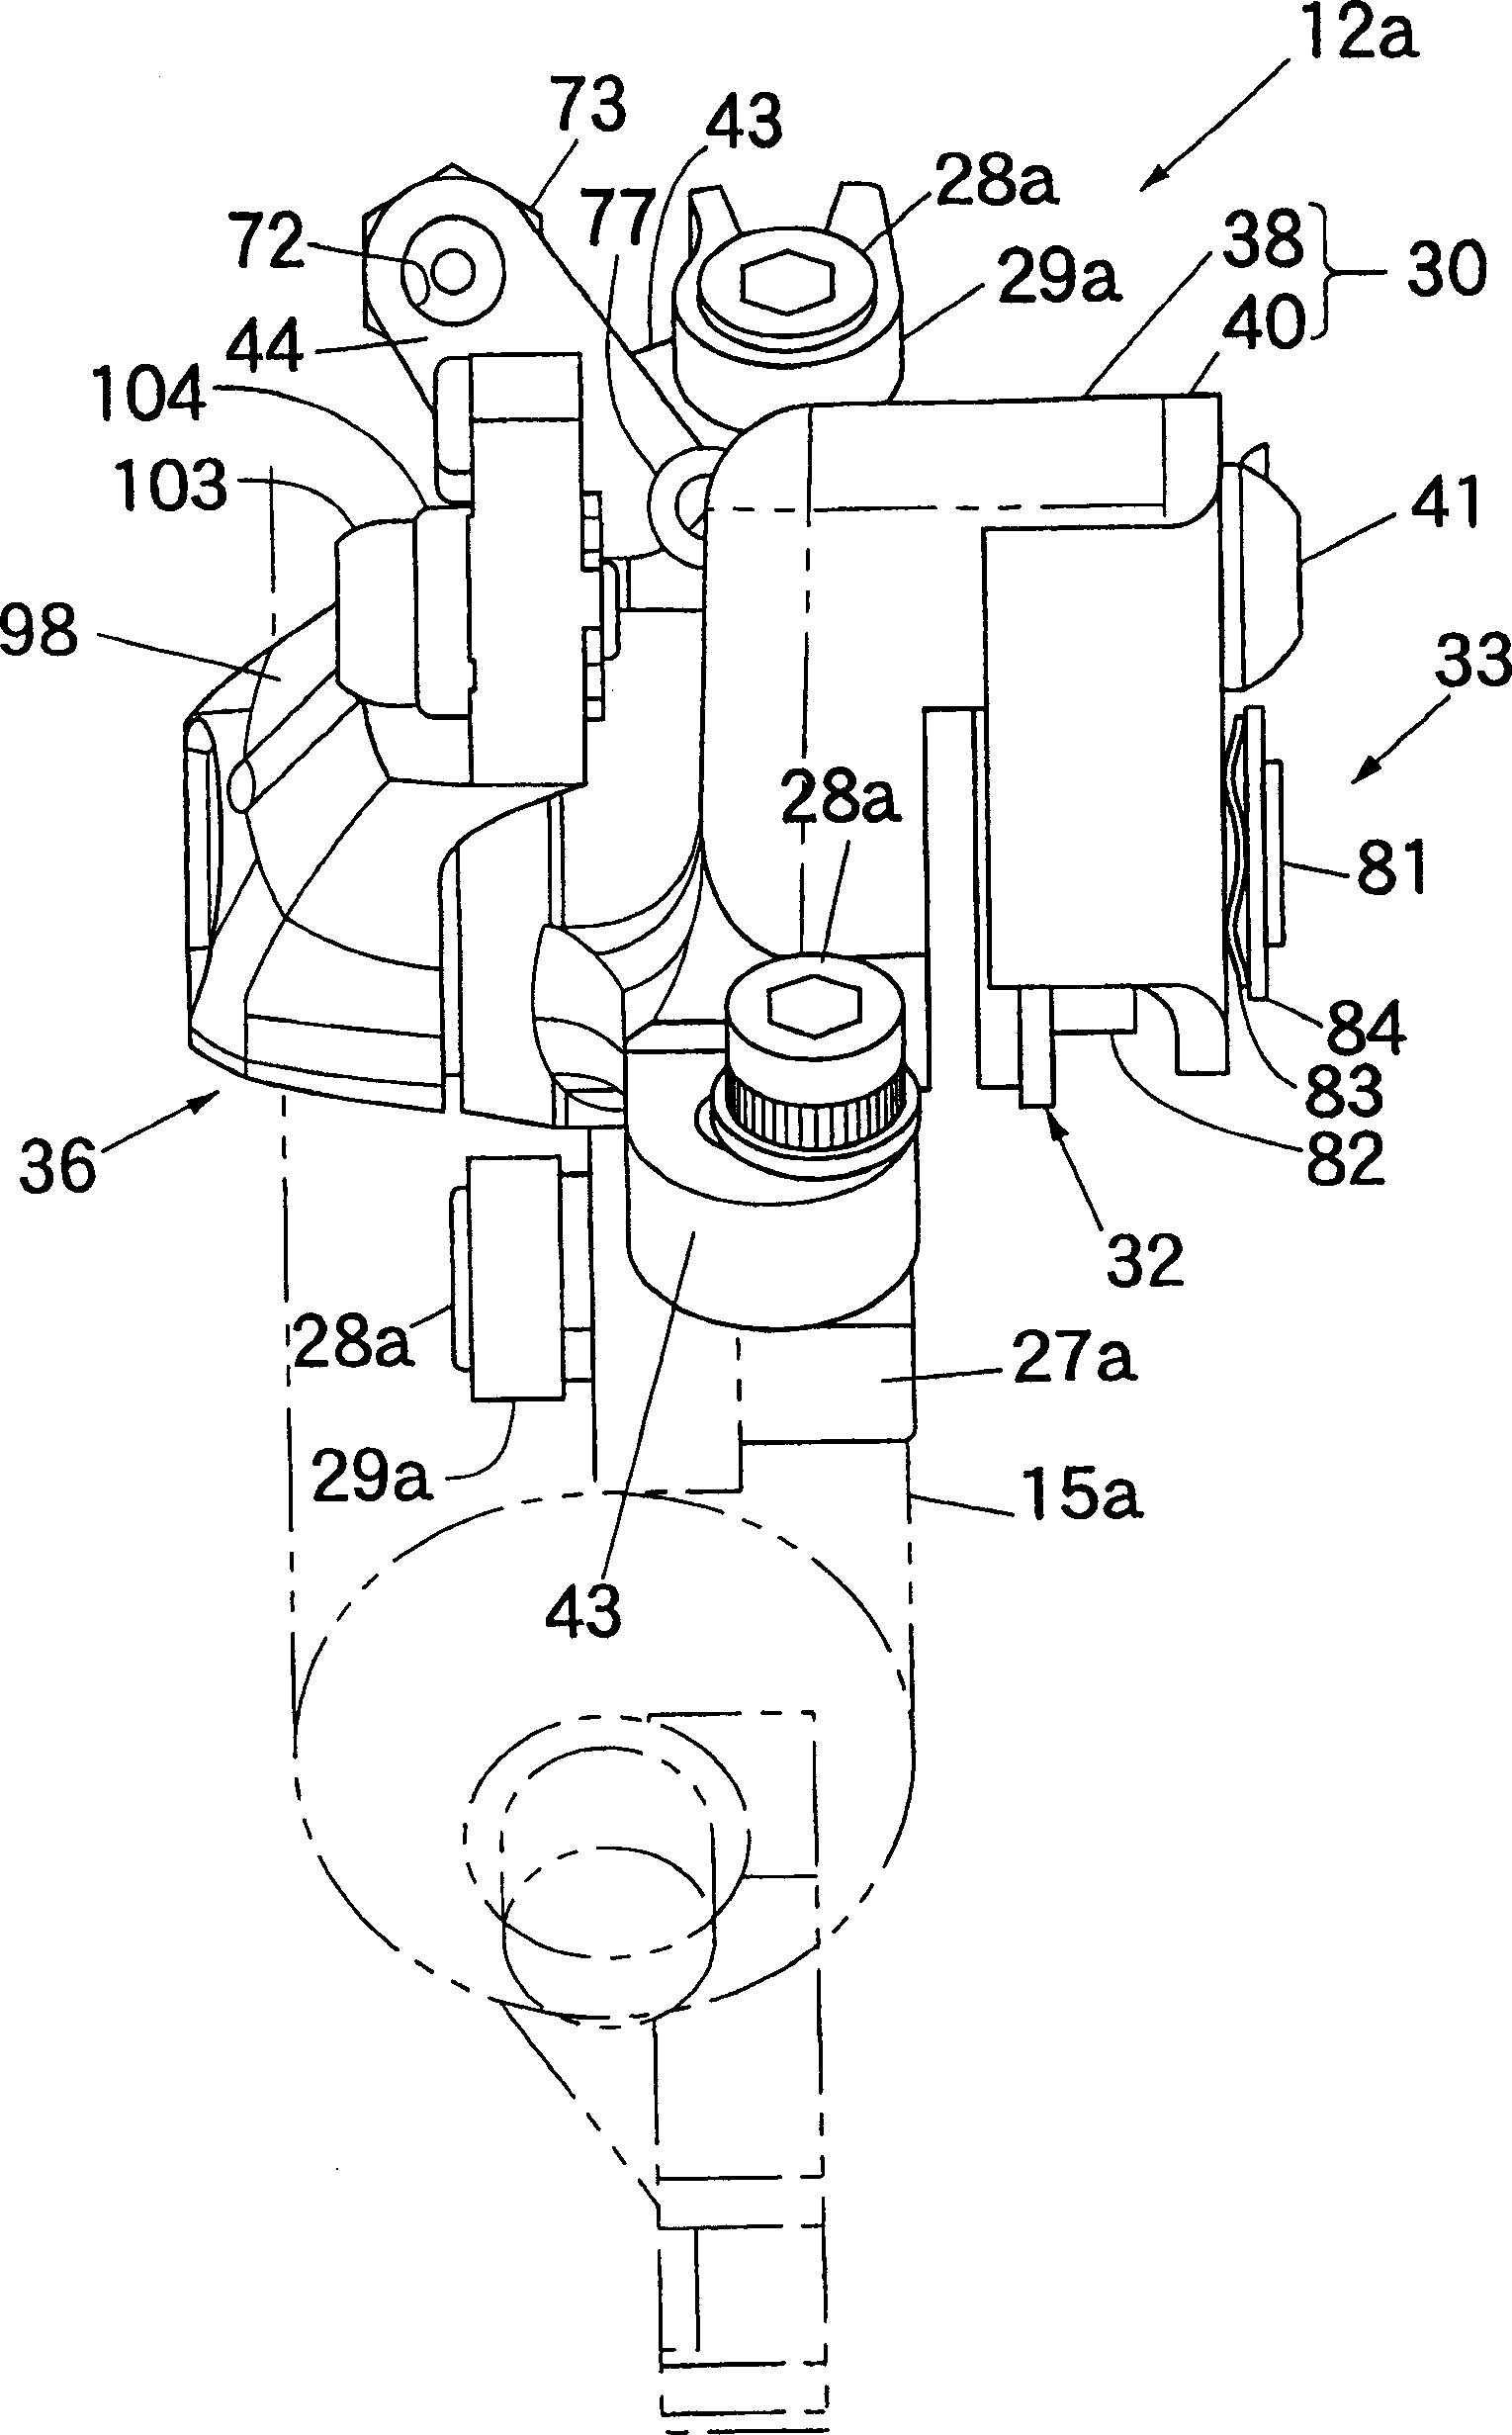 Disk brake for cable